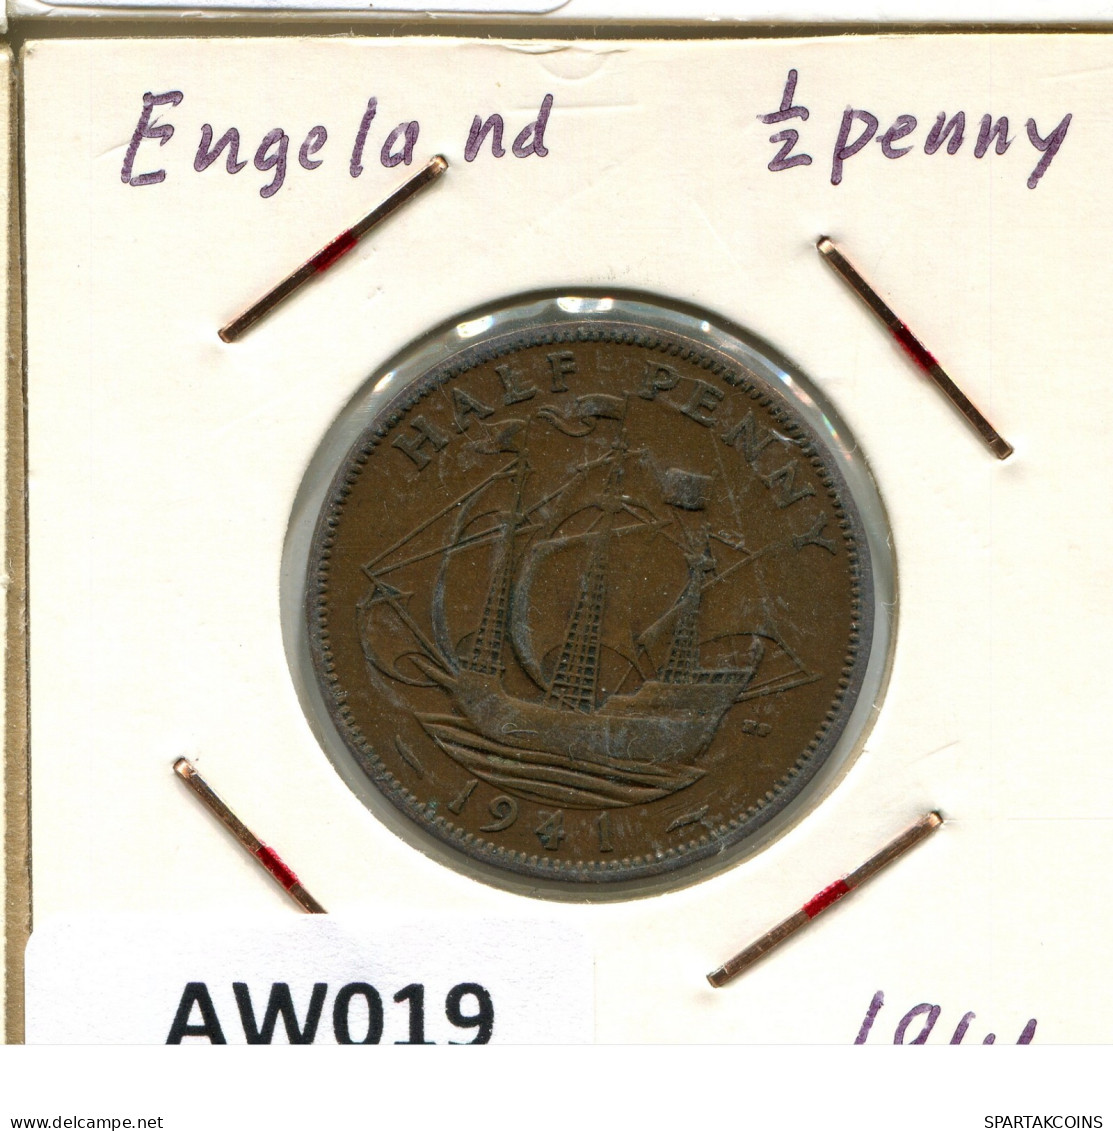 HALF PENNY 1941 UK GREAT BRITAIN Coin #AW019.U.A - C. 1/2 Penny